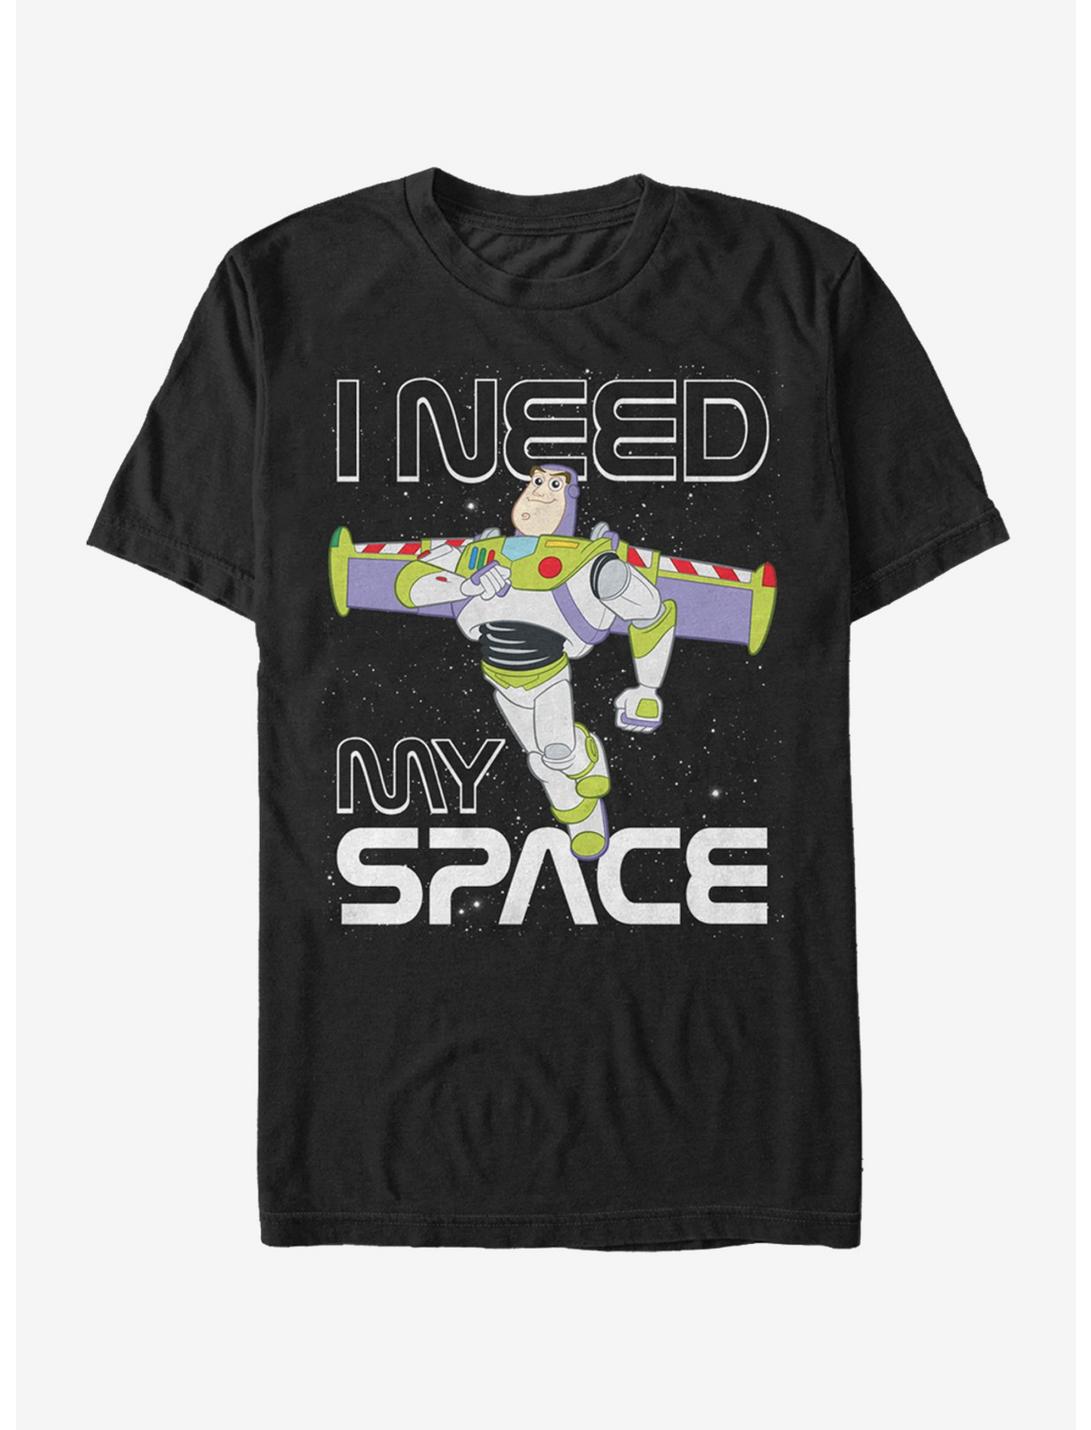 Toy Story Buzz Lightyear Need Space T-Shirt, BLACK, hi-res